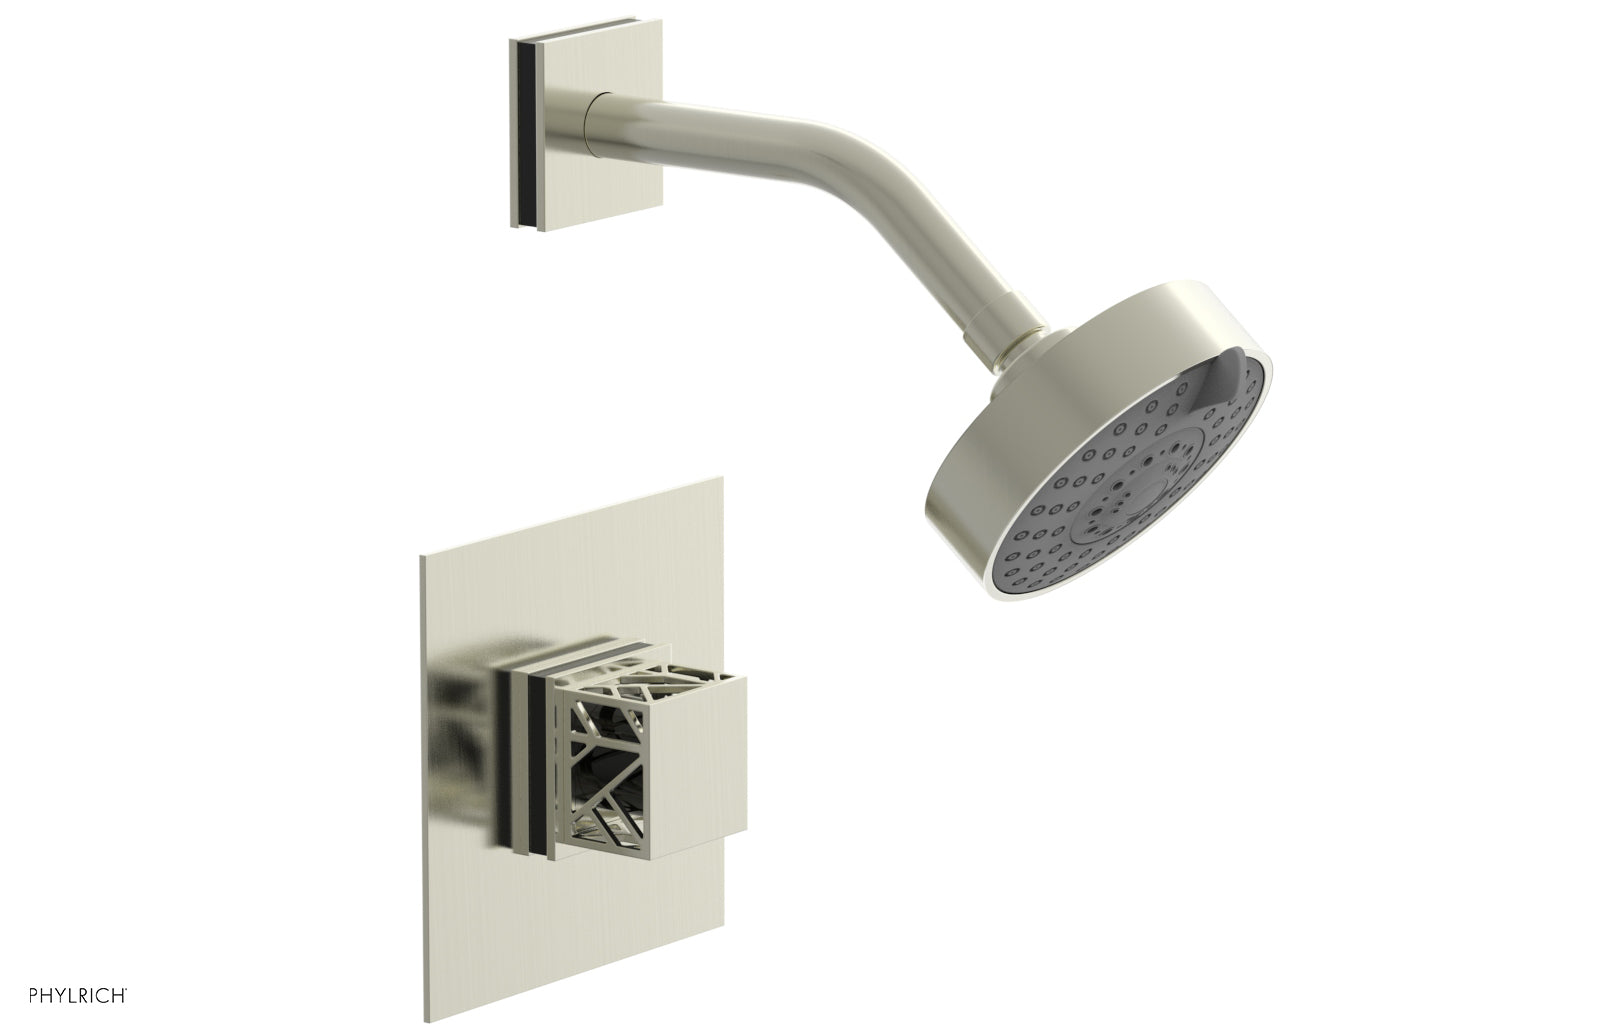 Phylrich JOLIE Pressure Balance Shower Set - Square Handle with "Black" Accents